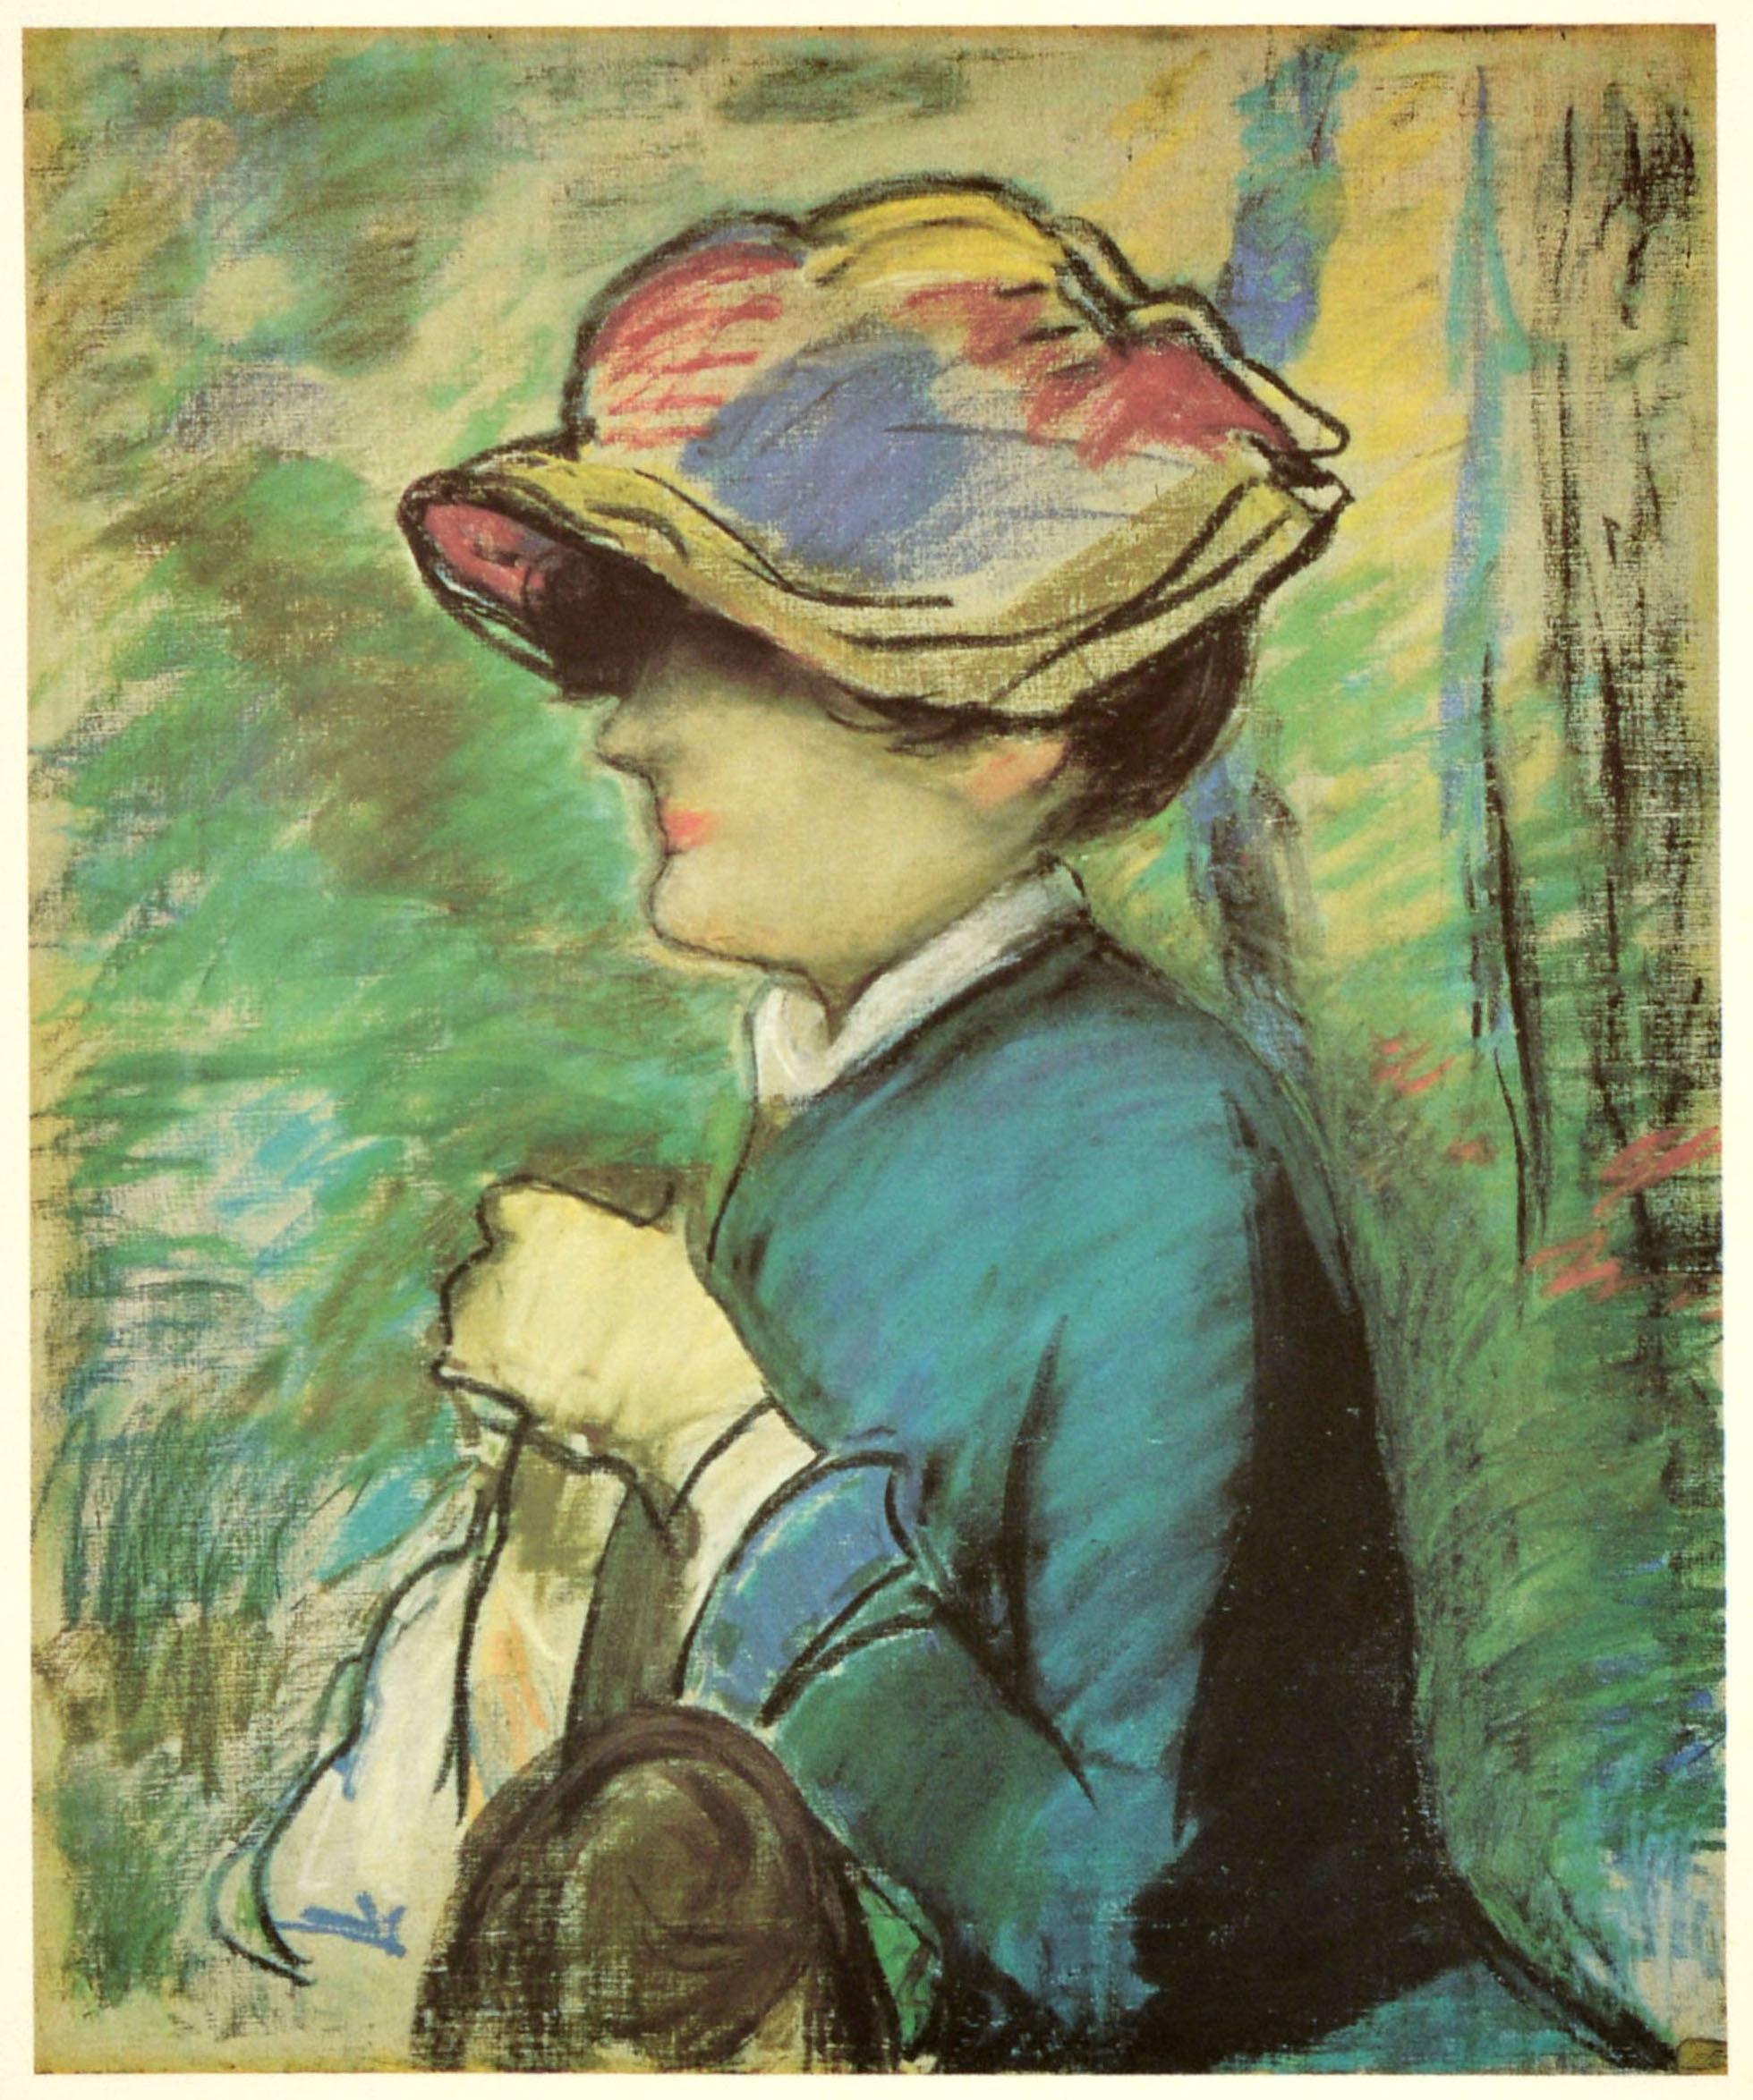 Original vintage art exhibition poster for Galerie Schmit Portraits Francais XIXe-XXe Siecles / French Portraits 14-15 Century held in Paris from 15 May to 15 June 1974, featuring the artwork Young Woman in a Broad Hat by the French painter Edouard